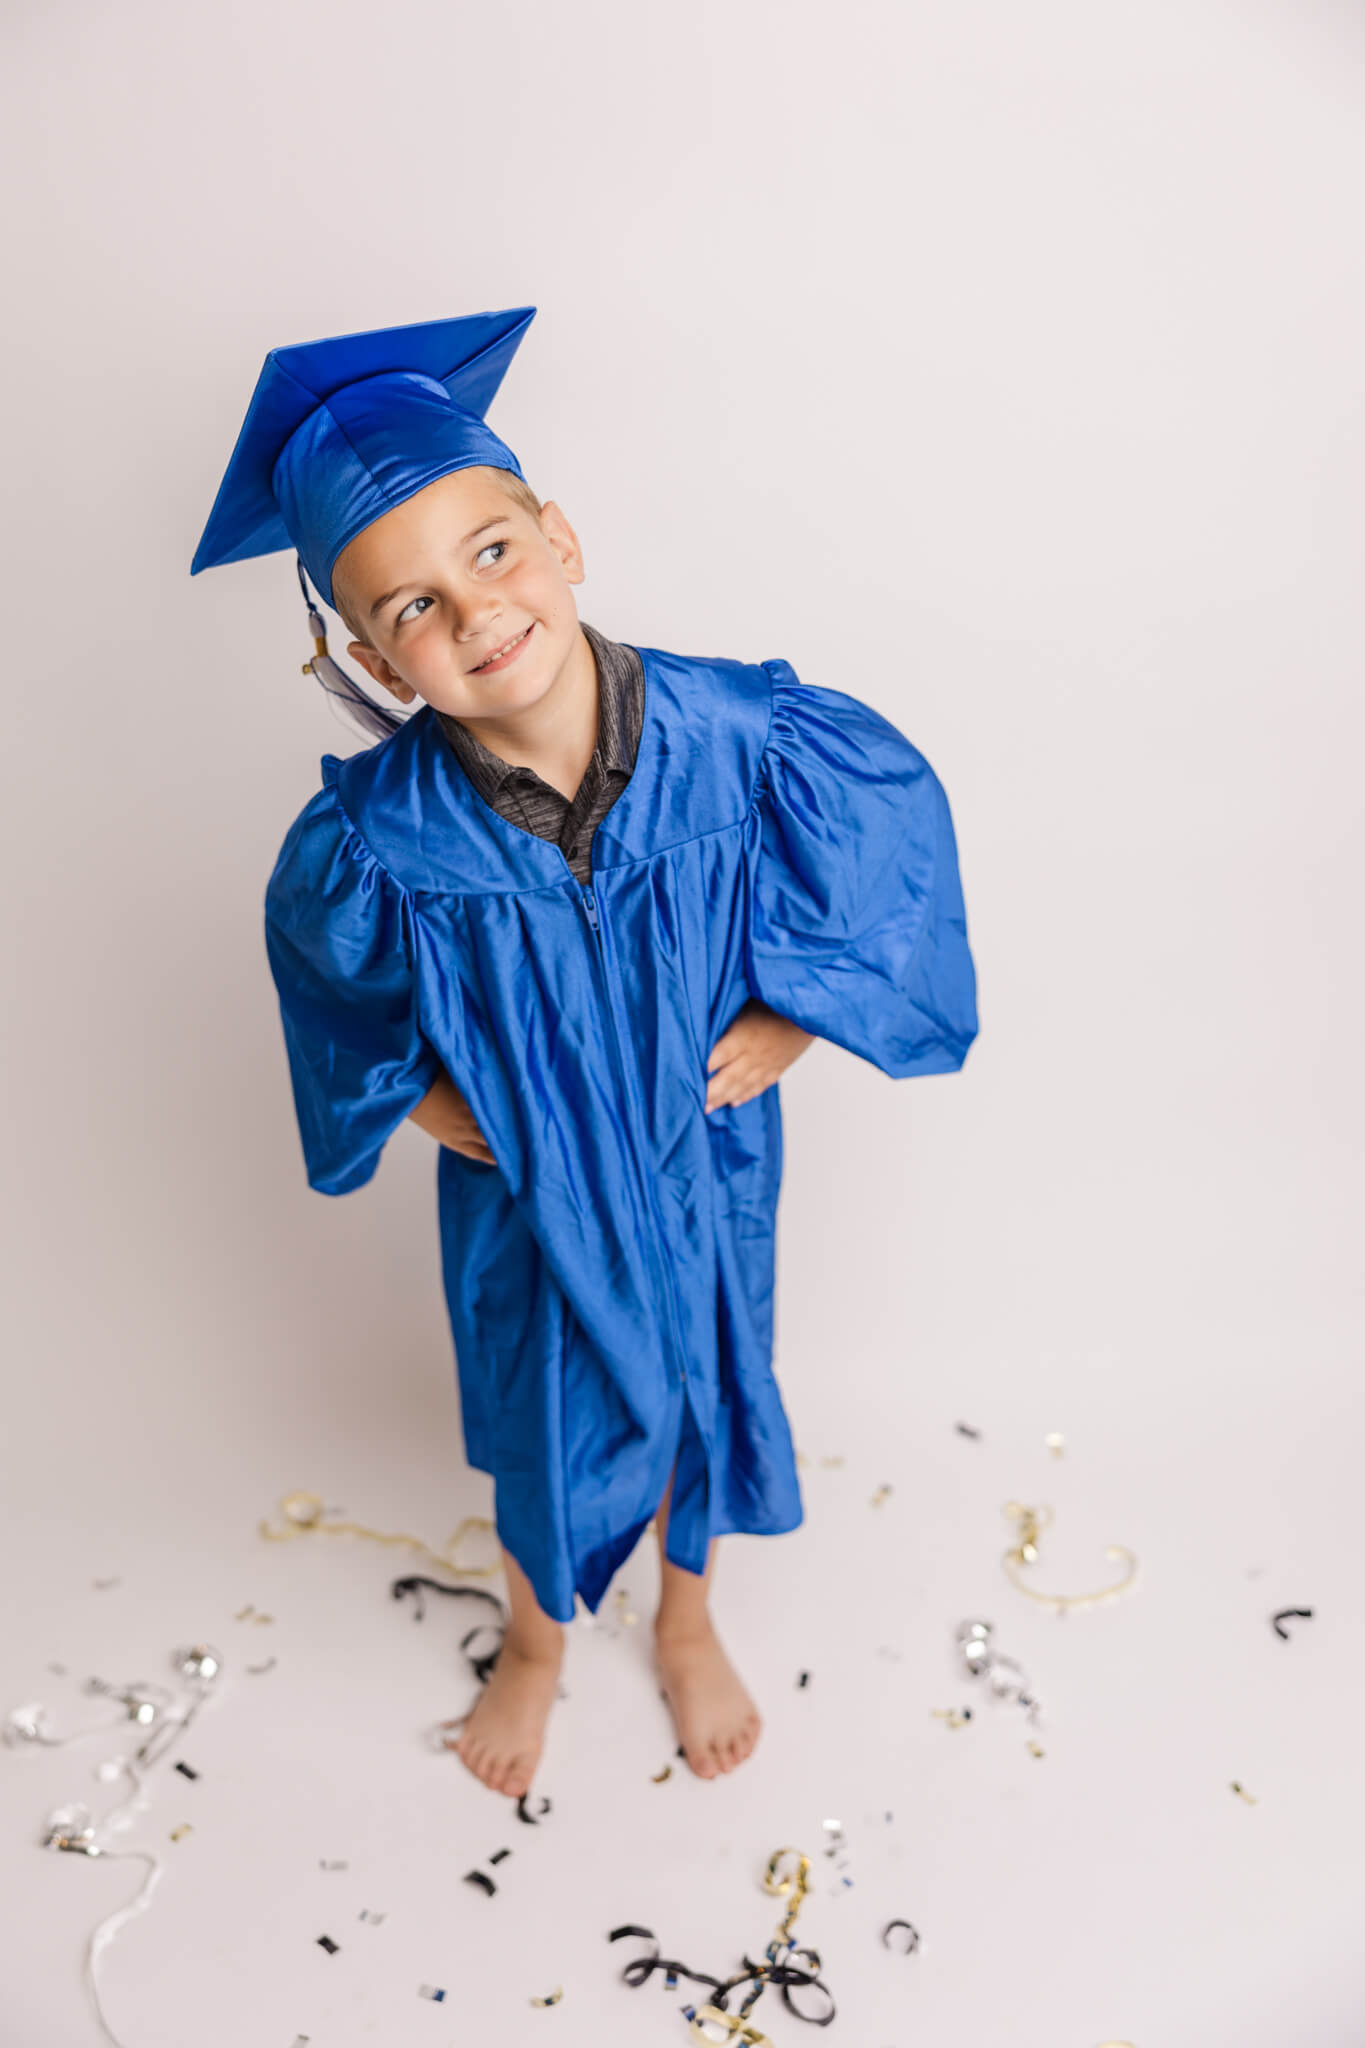 Four year old being silly during his studio photoshoot. Highly-Rated 